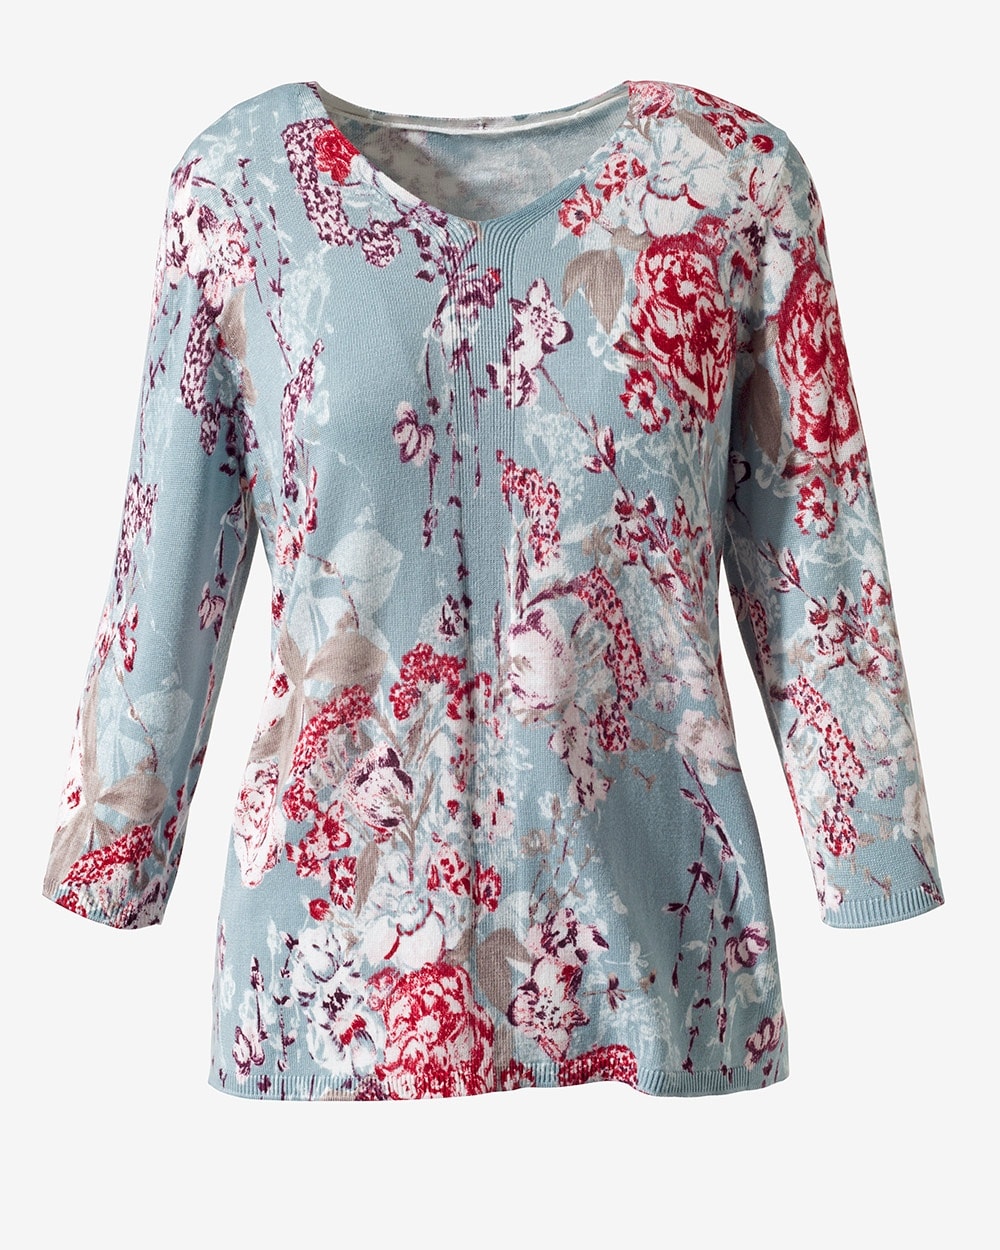 Painted Floral Print V-Neck Sweater